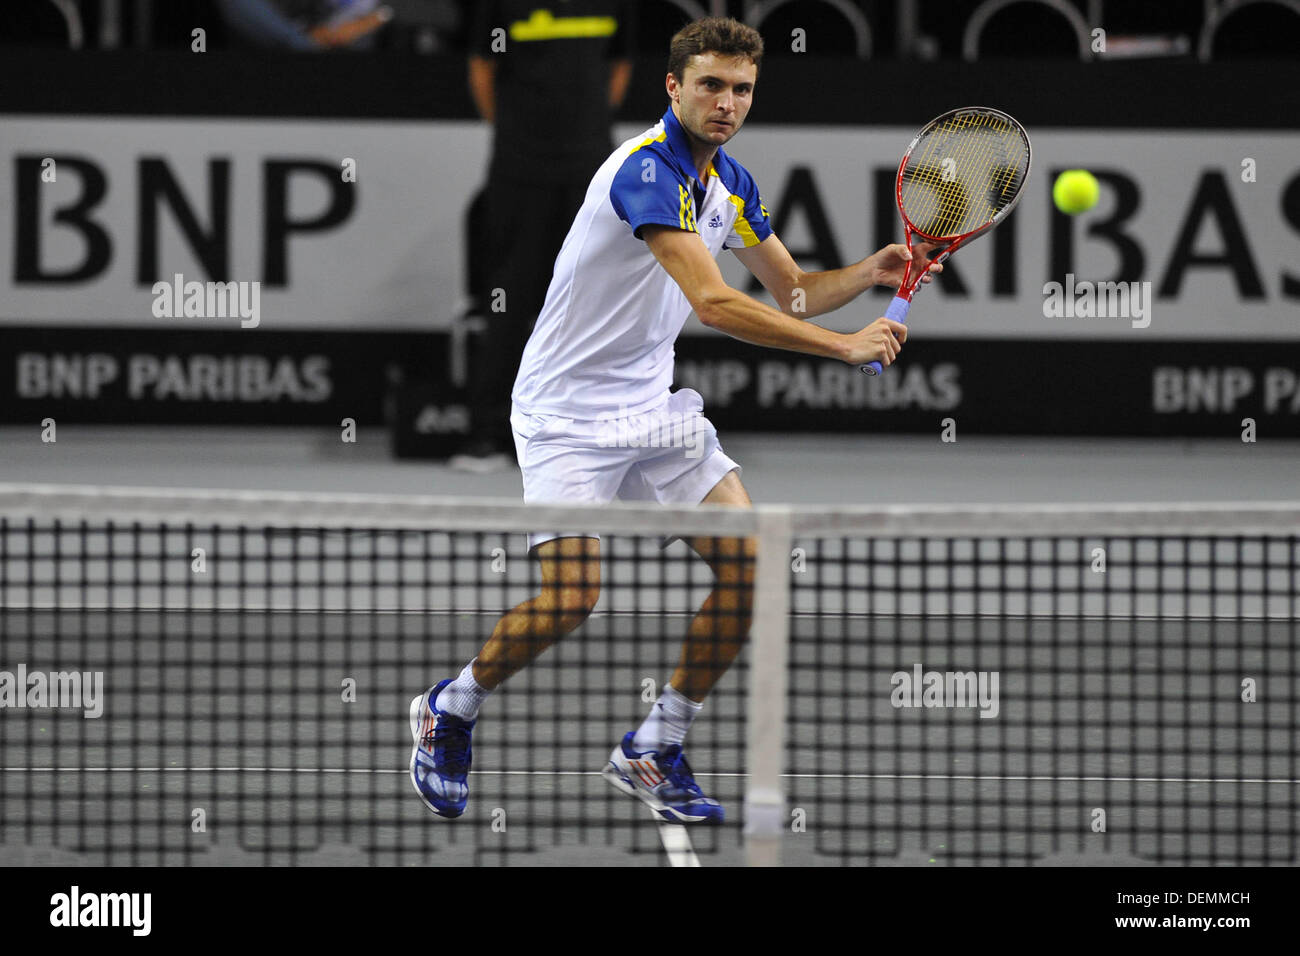 Metz, France. 21st Sep, 2013. The Moselle Open ATP tennis tournament  semi-finals. Gilles Simon (Fra) Credit: Action Plus Sports/Alamy Live News  Stock Photo - Alamy